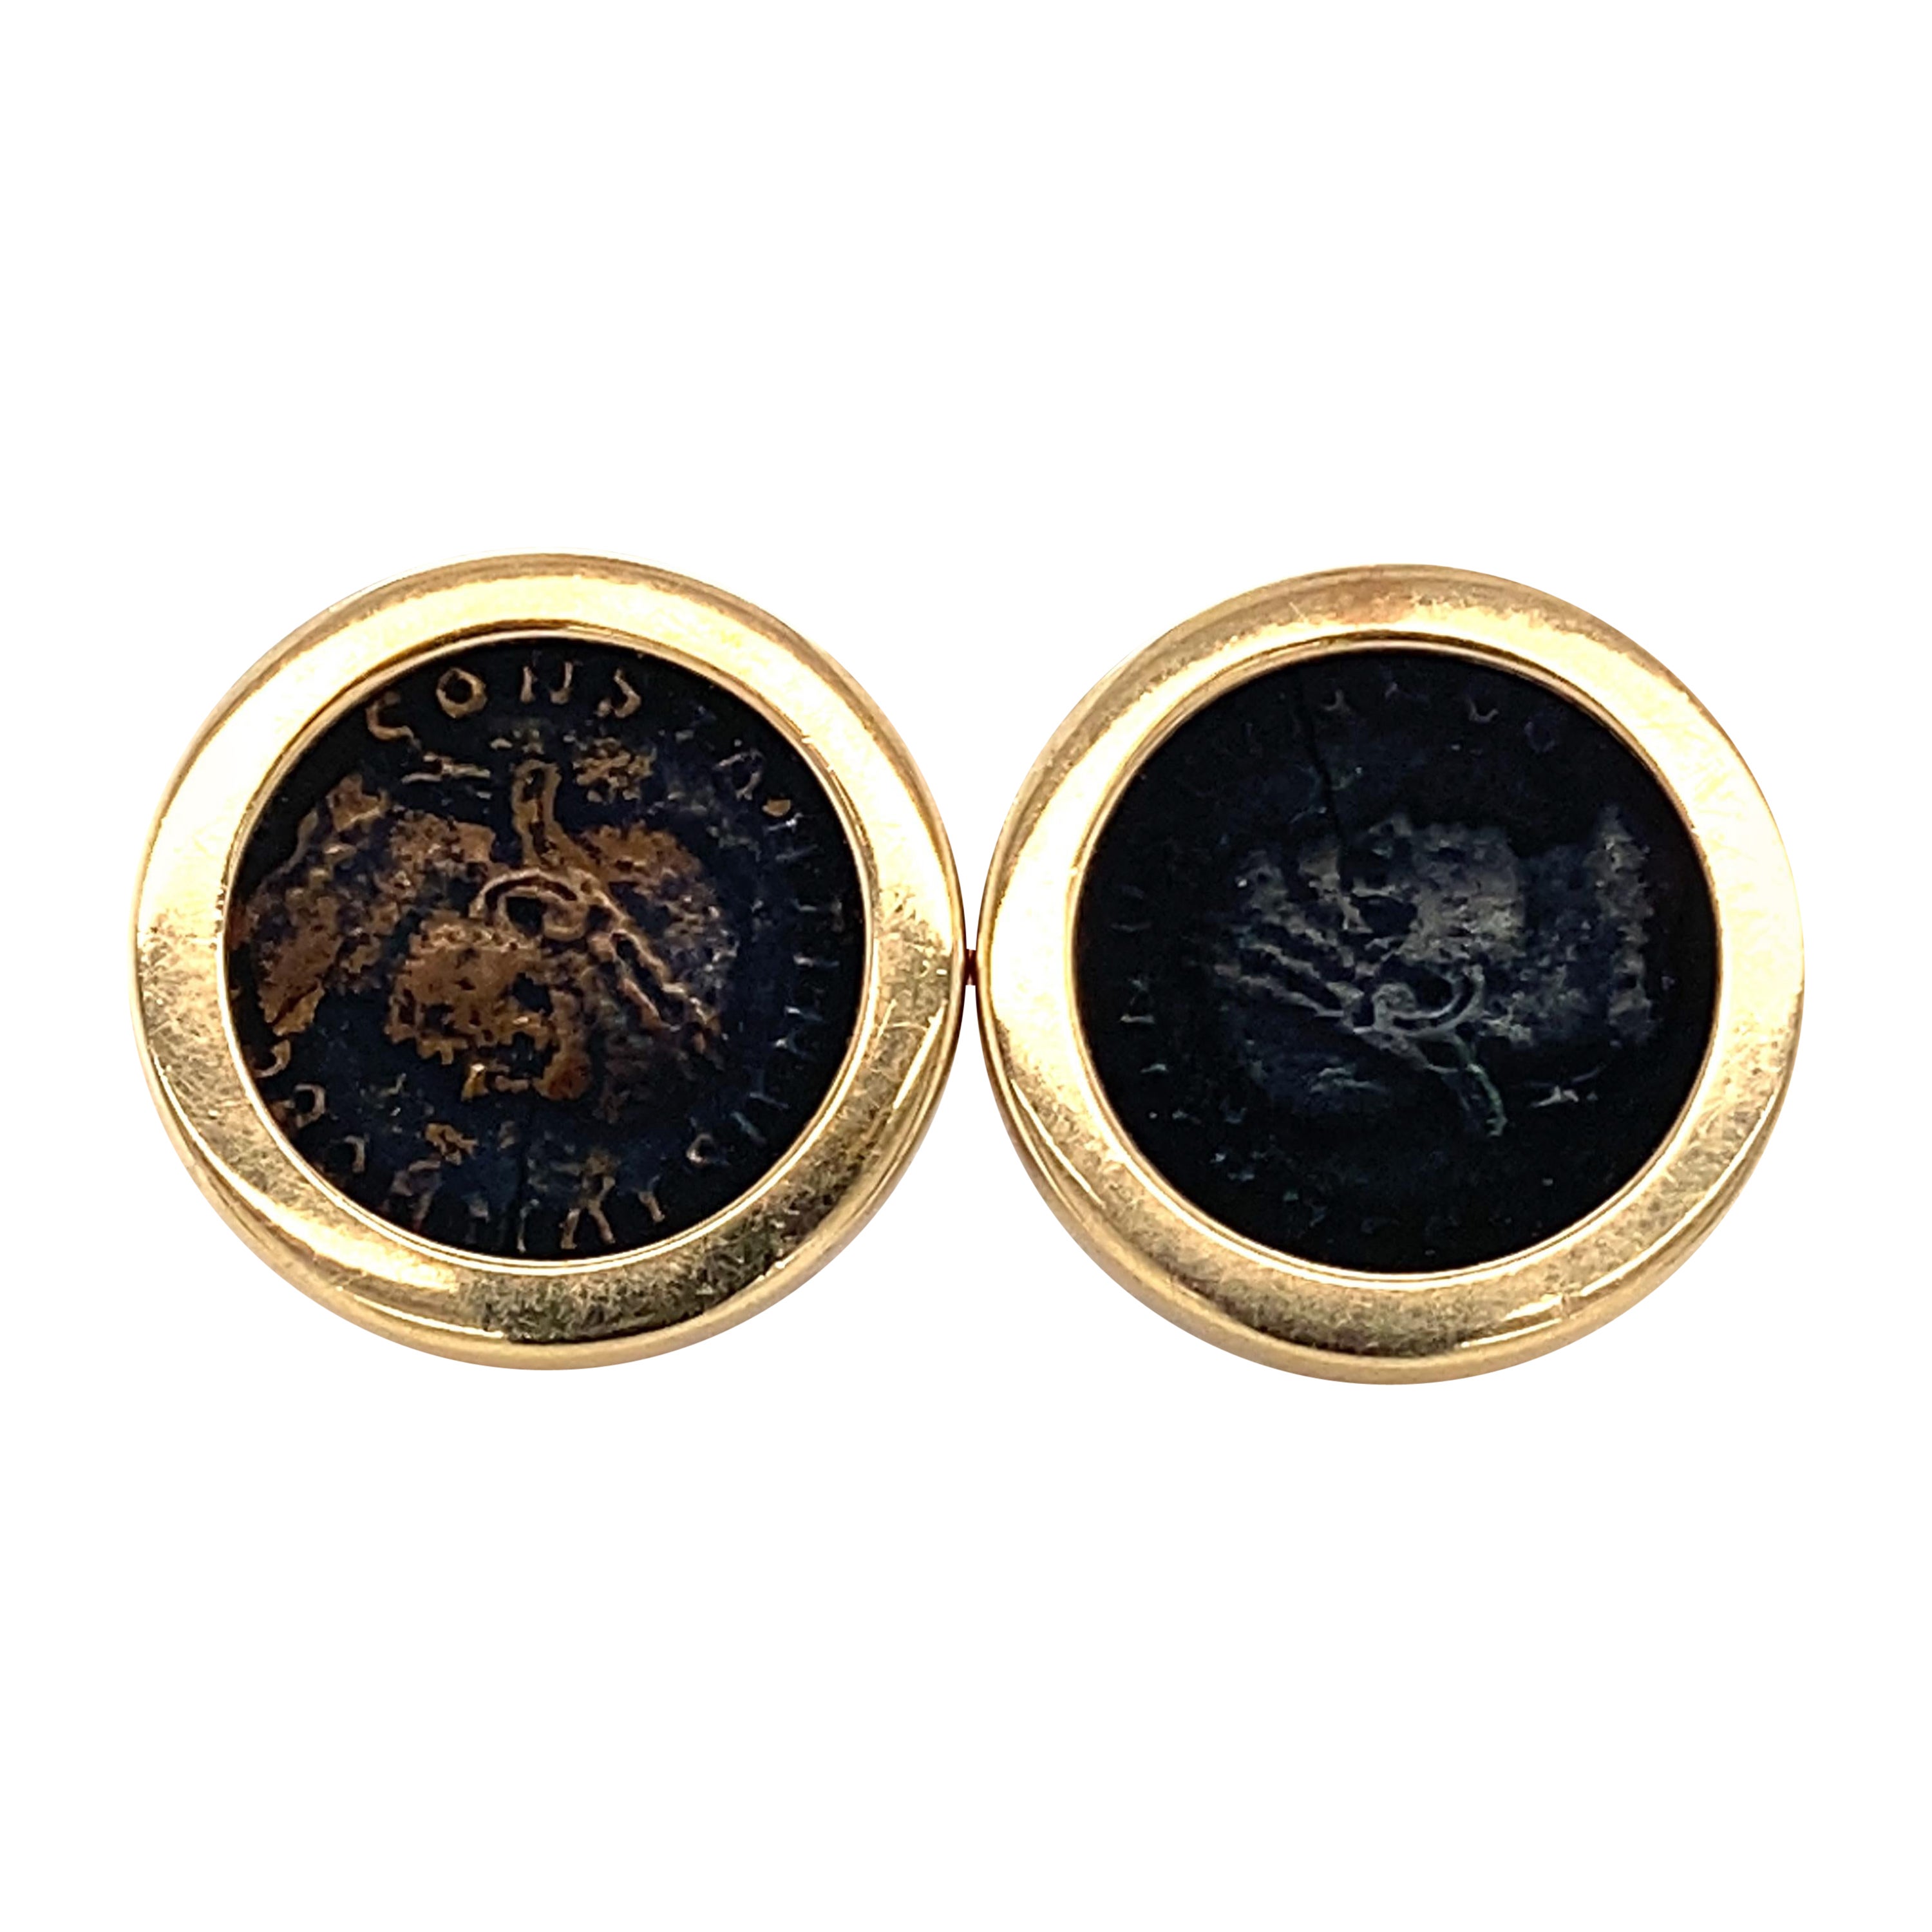 1950s Roman Coin Earrings in 14 Karat Gold, Made in Italy